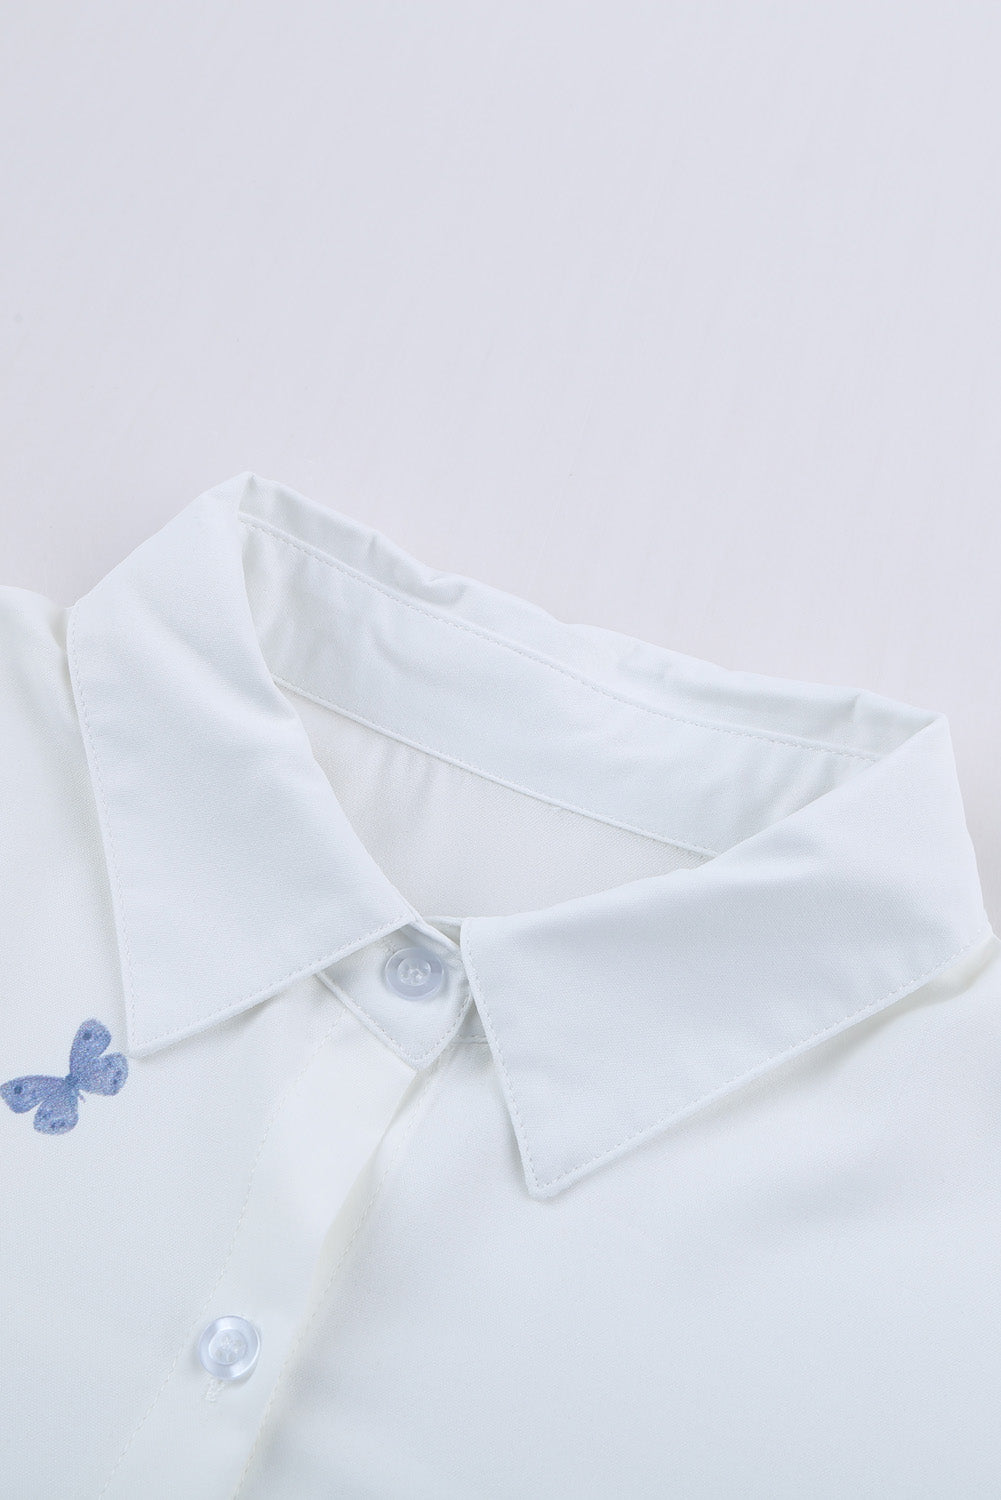 White Butterfly Print Pocketed Shirt